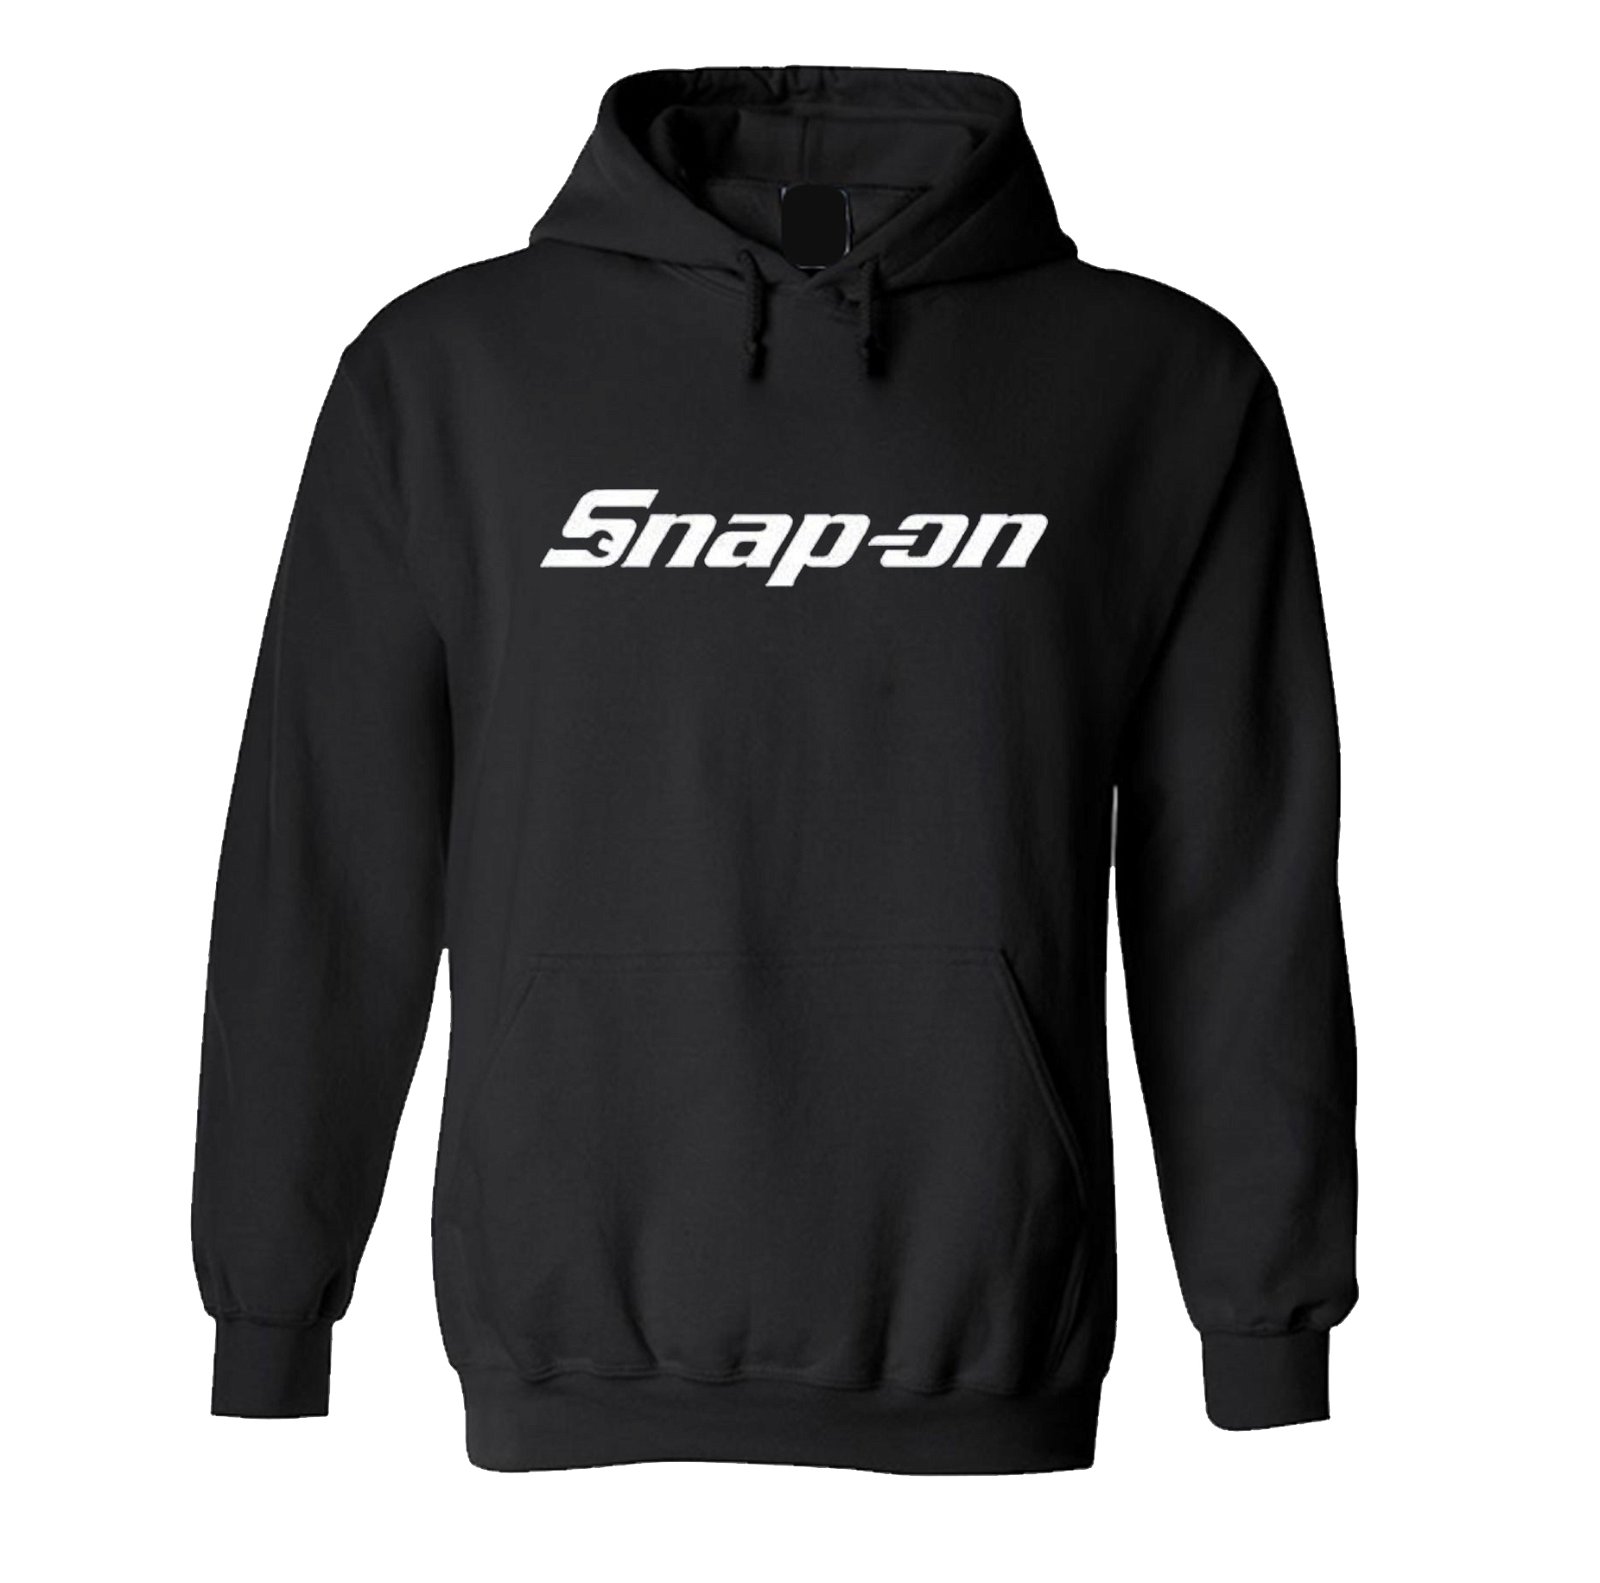 Snap-On Black Pullover Hood Sweatshirt Size S,M,L,XL available 